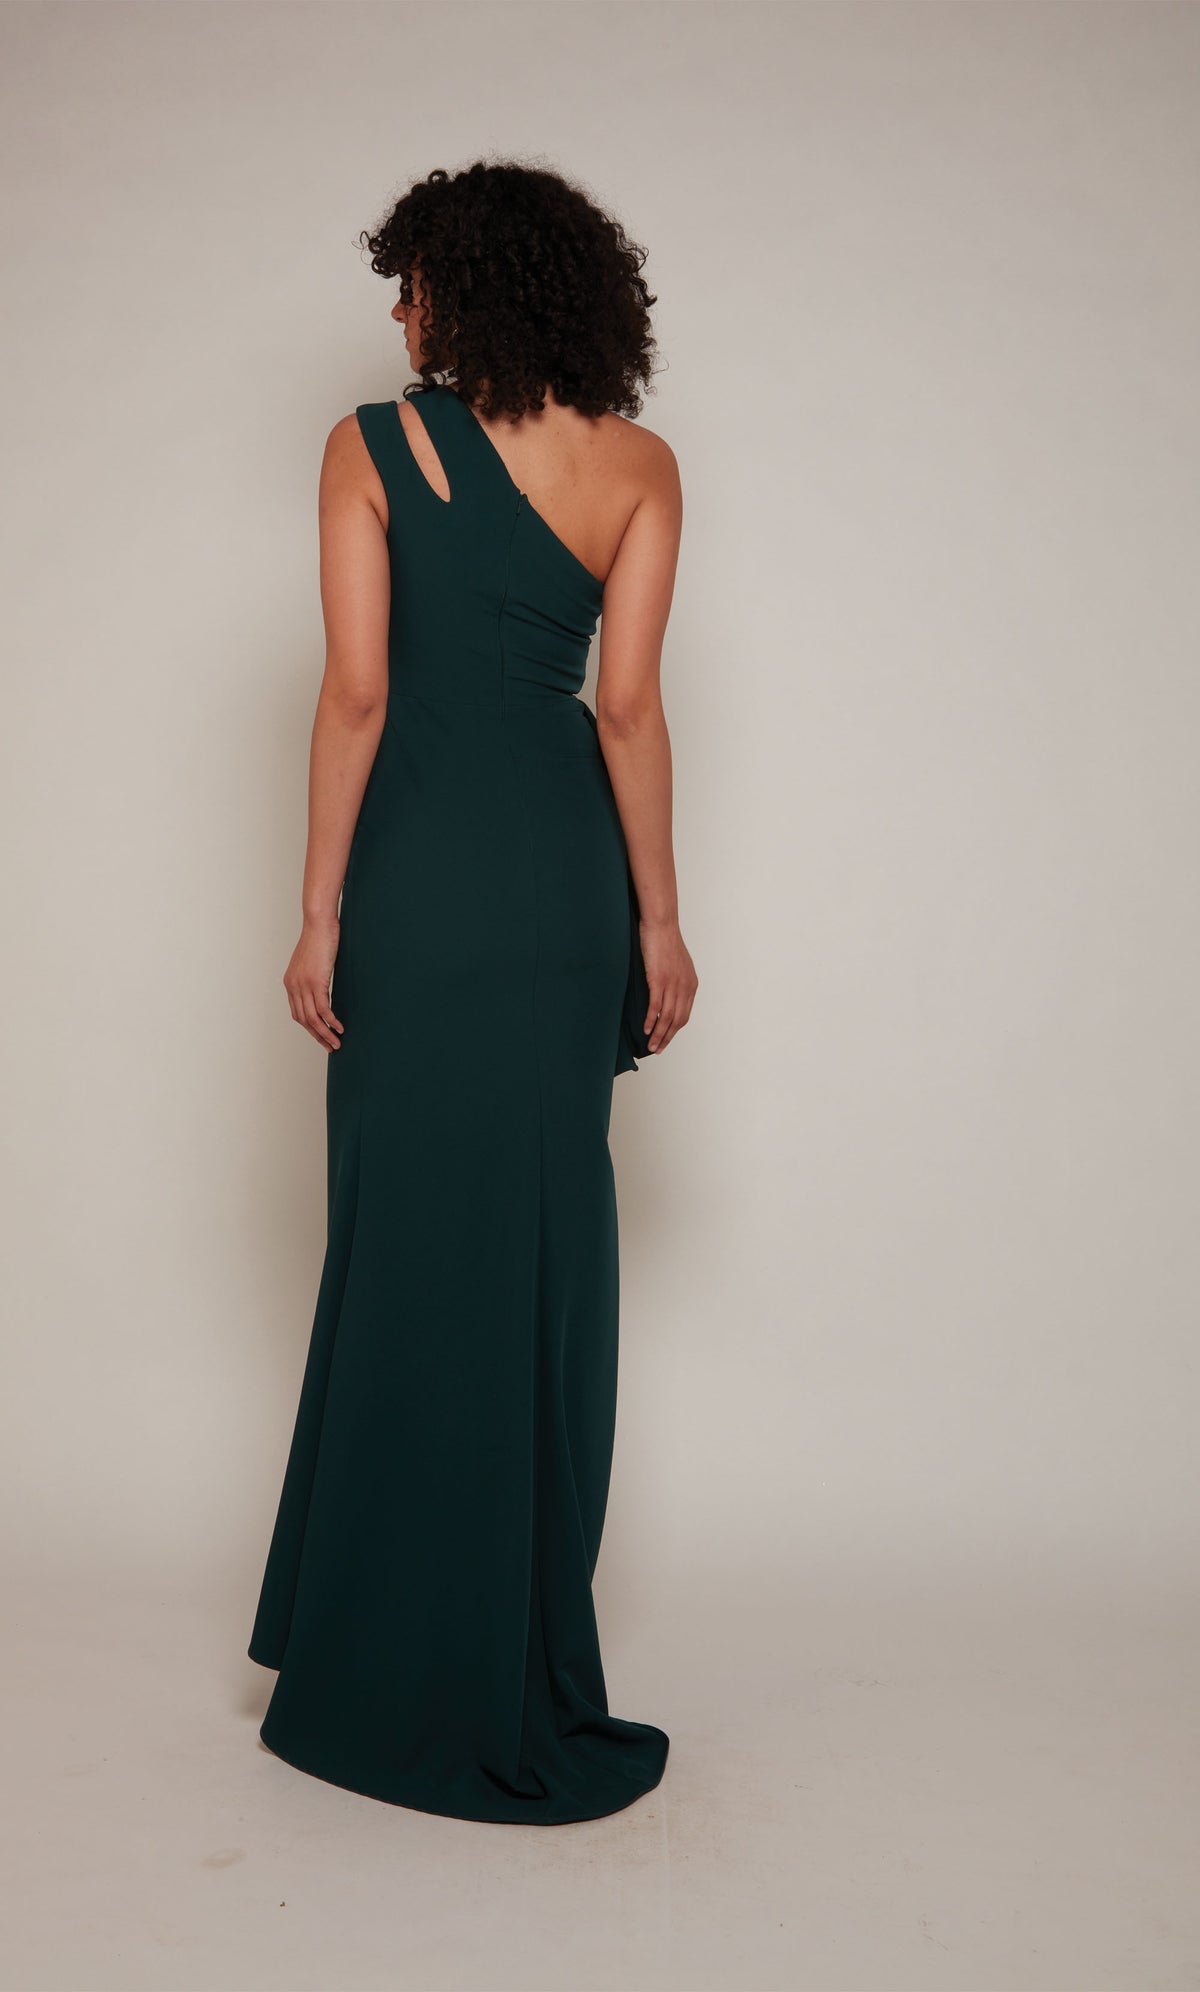 Forest green long evening gown highlighting a cutout, one shoulder neckline, a zip-up back, and slight train.